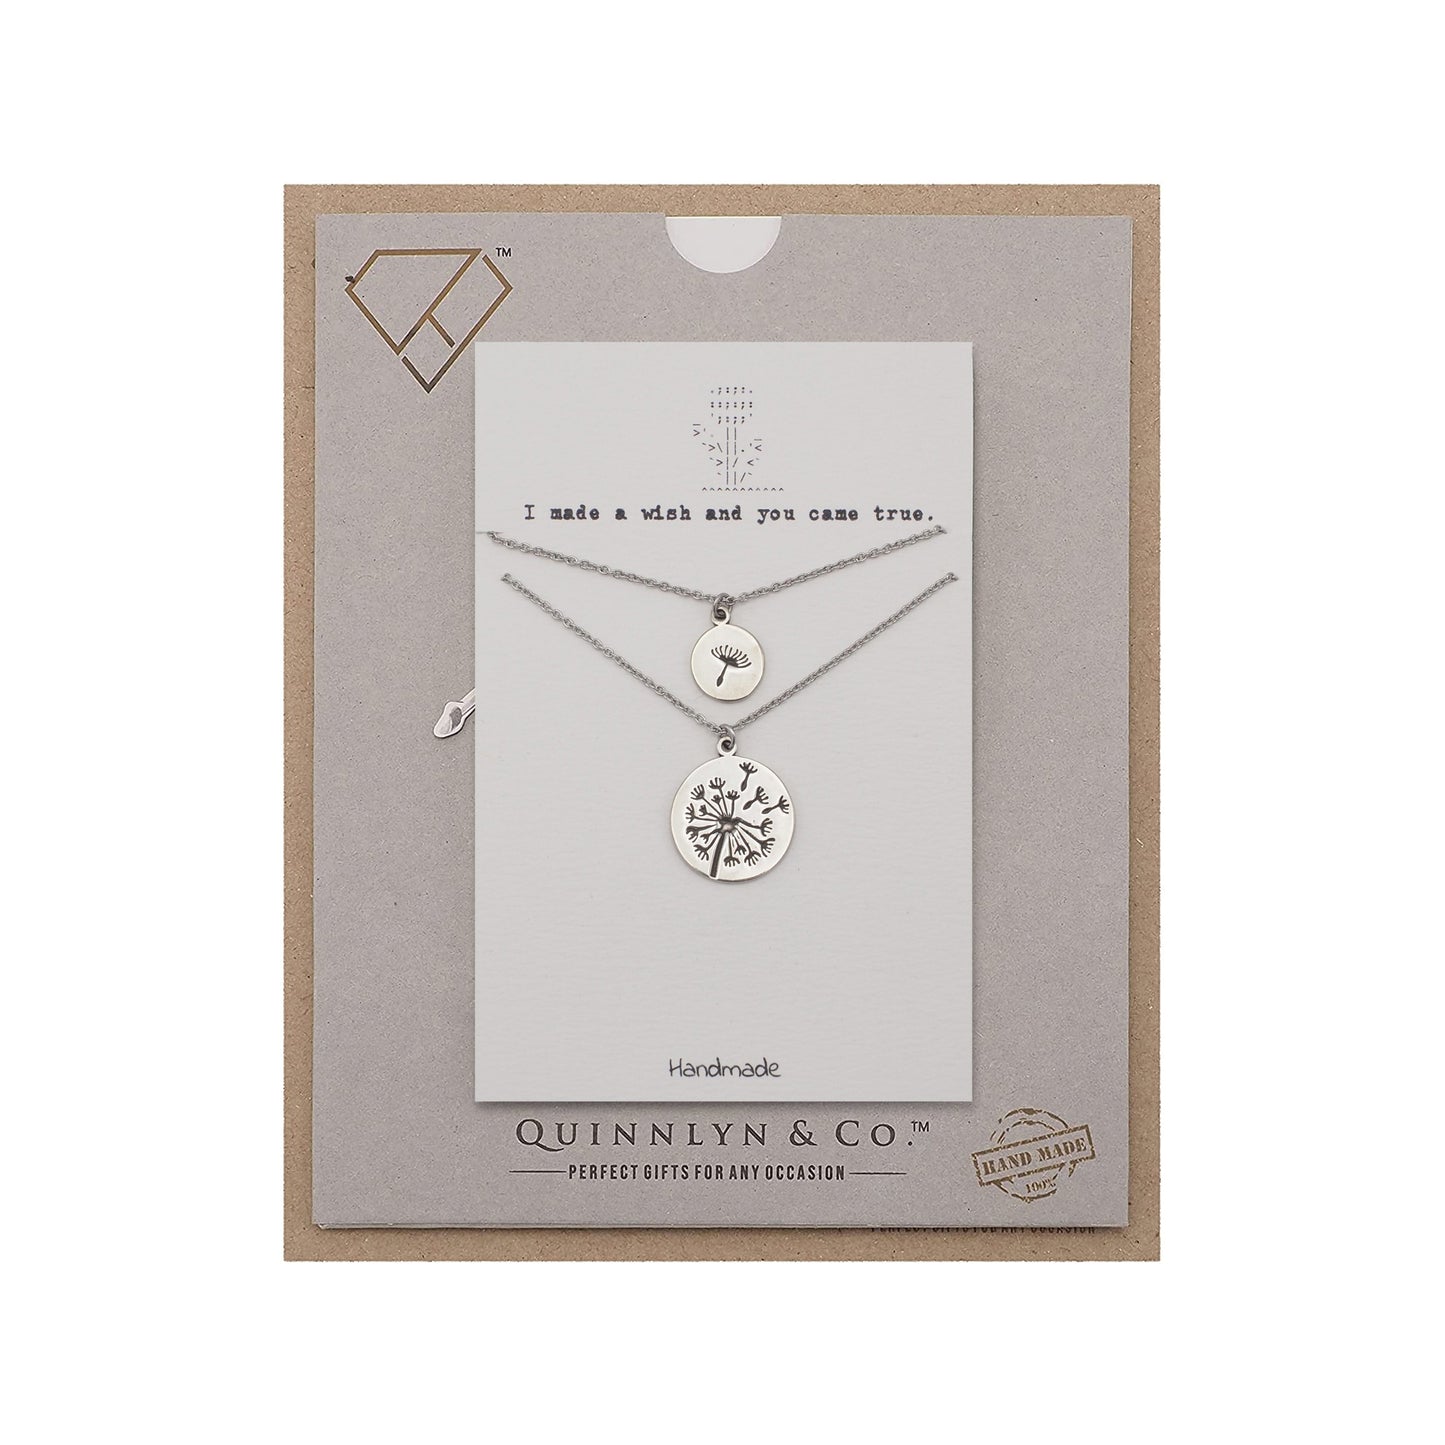 Quinnlyn & Co. Dandelion Pendant Necklace, Birthday Gifts for Women with Inspirational Quote on Greeting Card, Set of 2